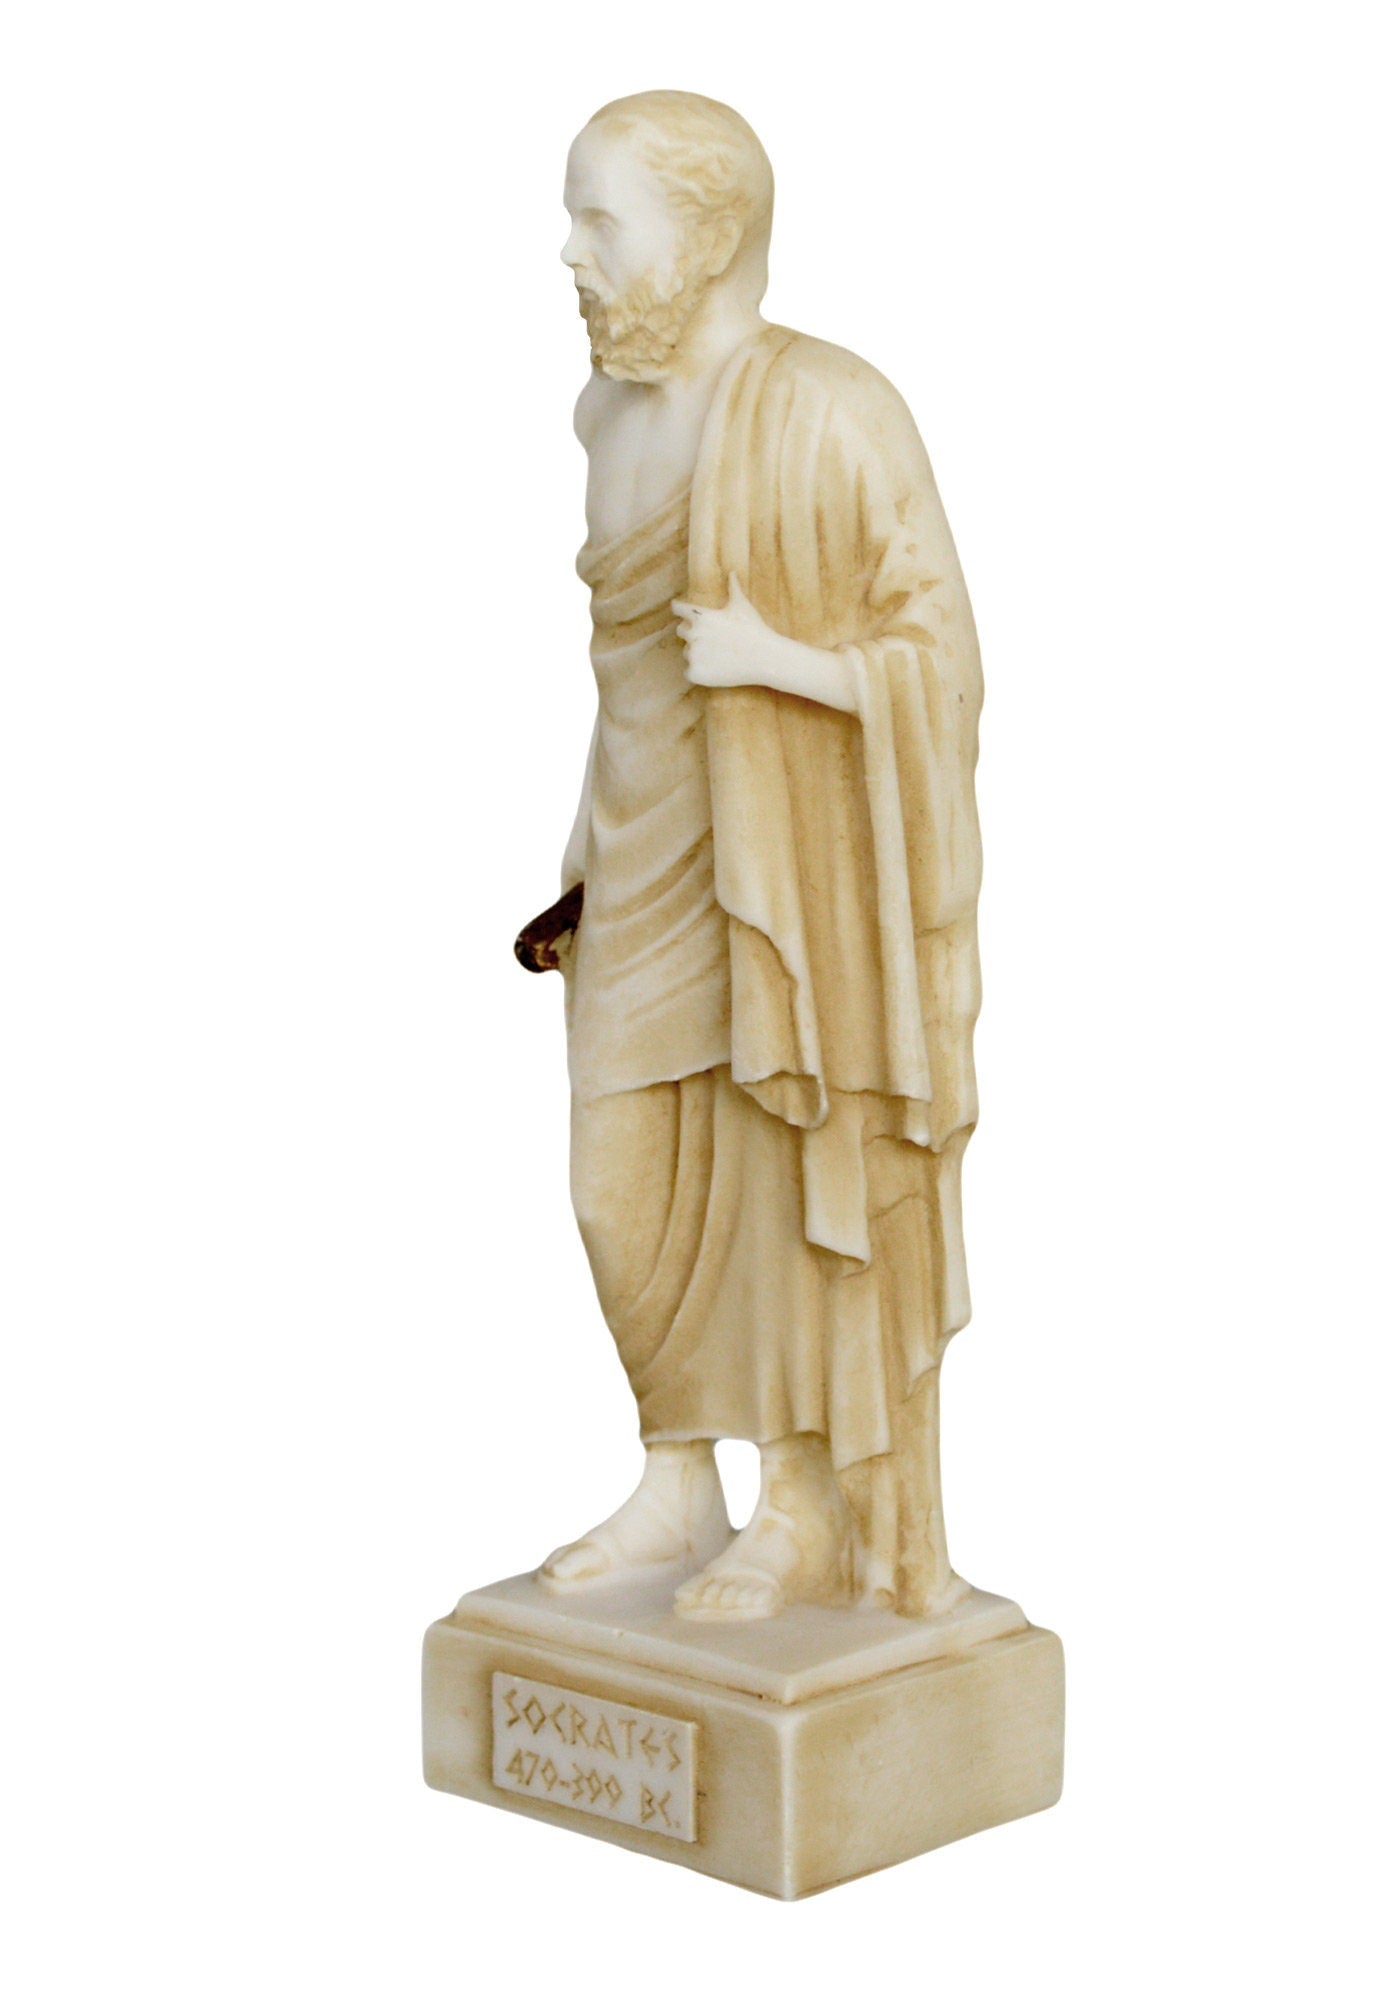 Socrates - Ancient Greek Philosopher - 470-399 BC - Teacher of Plato - Father of Western Philosophy - Aged Alabaster Statue